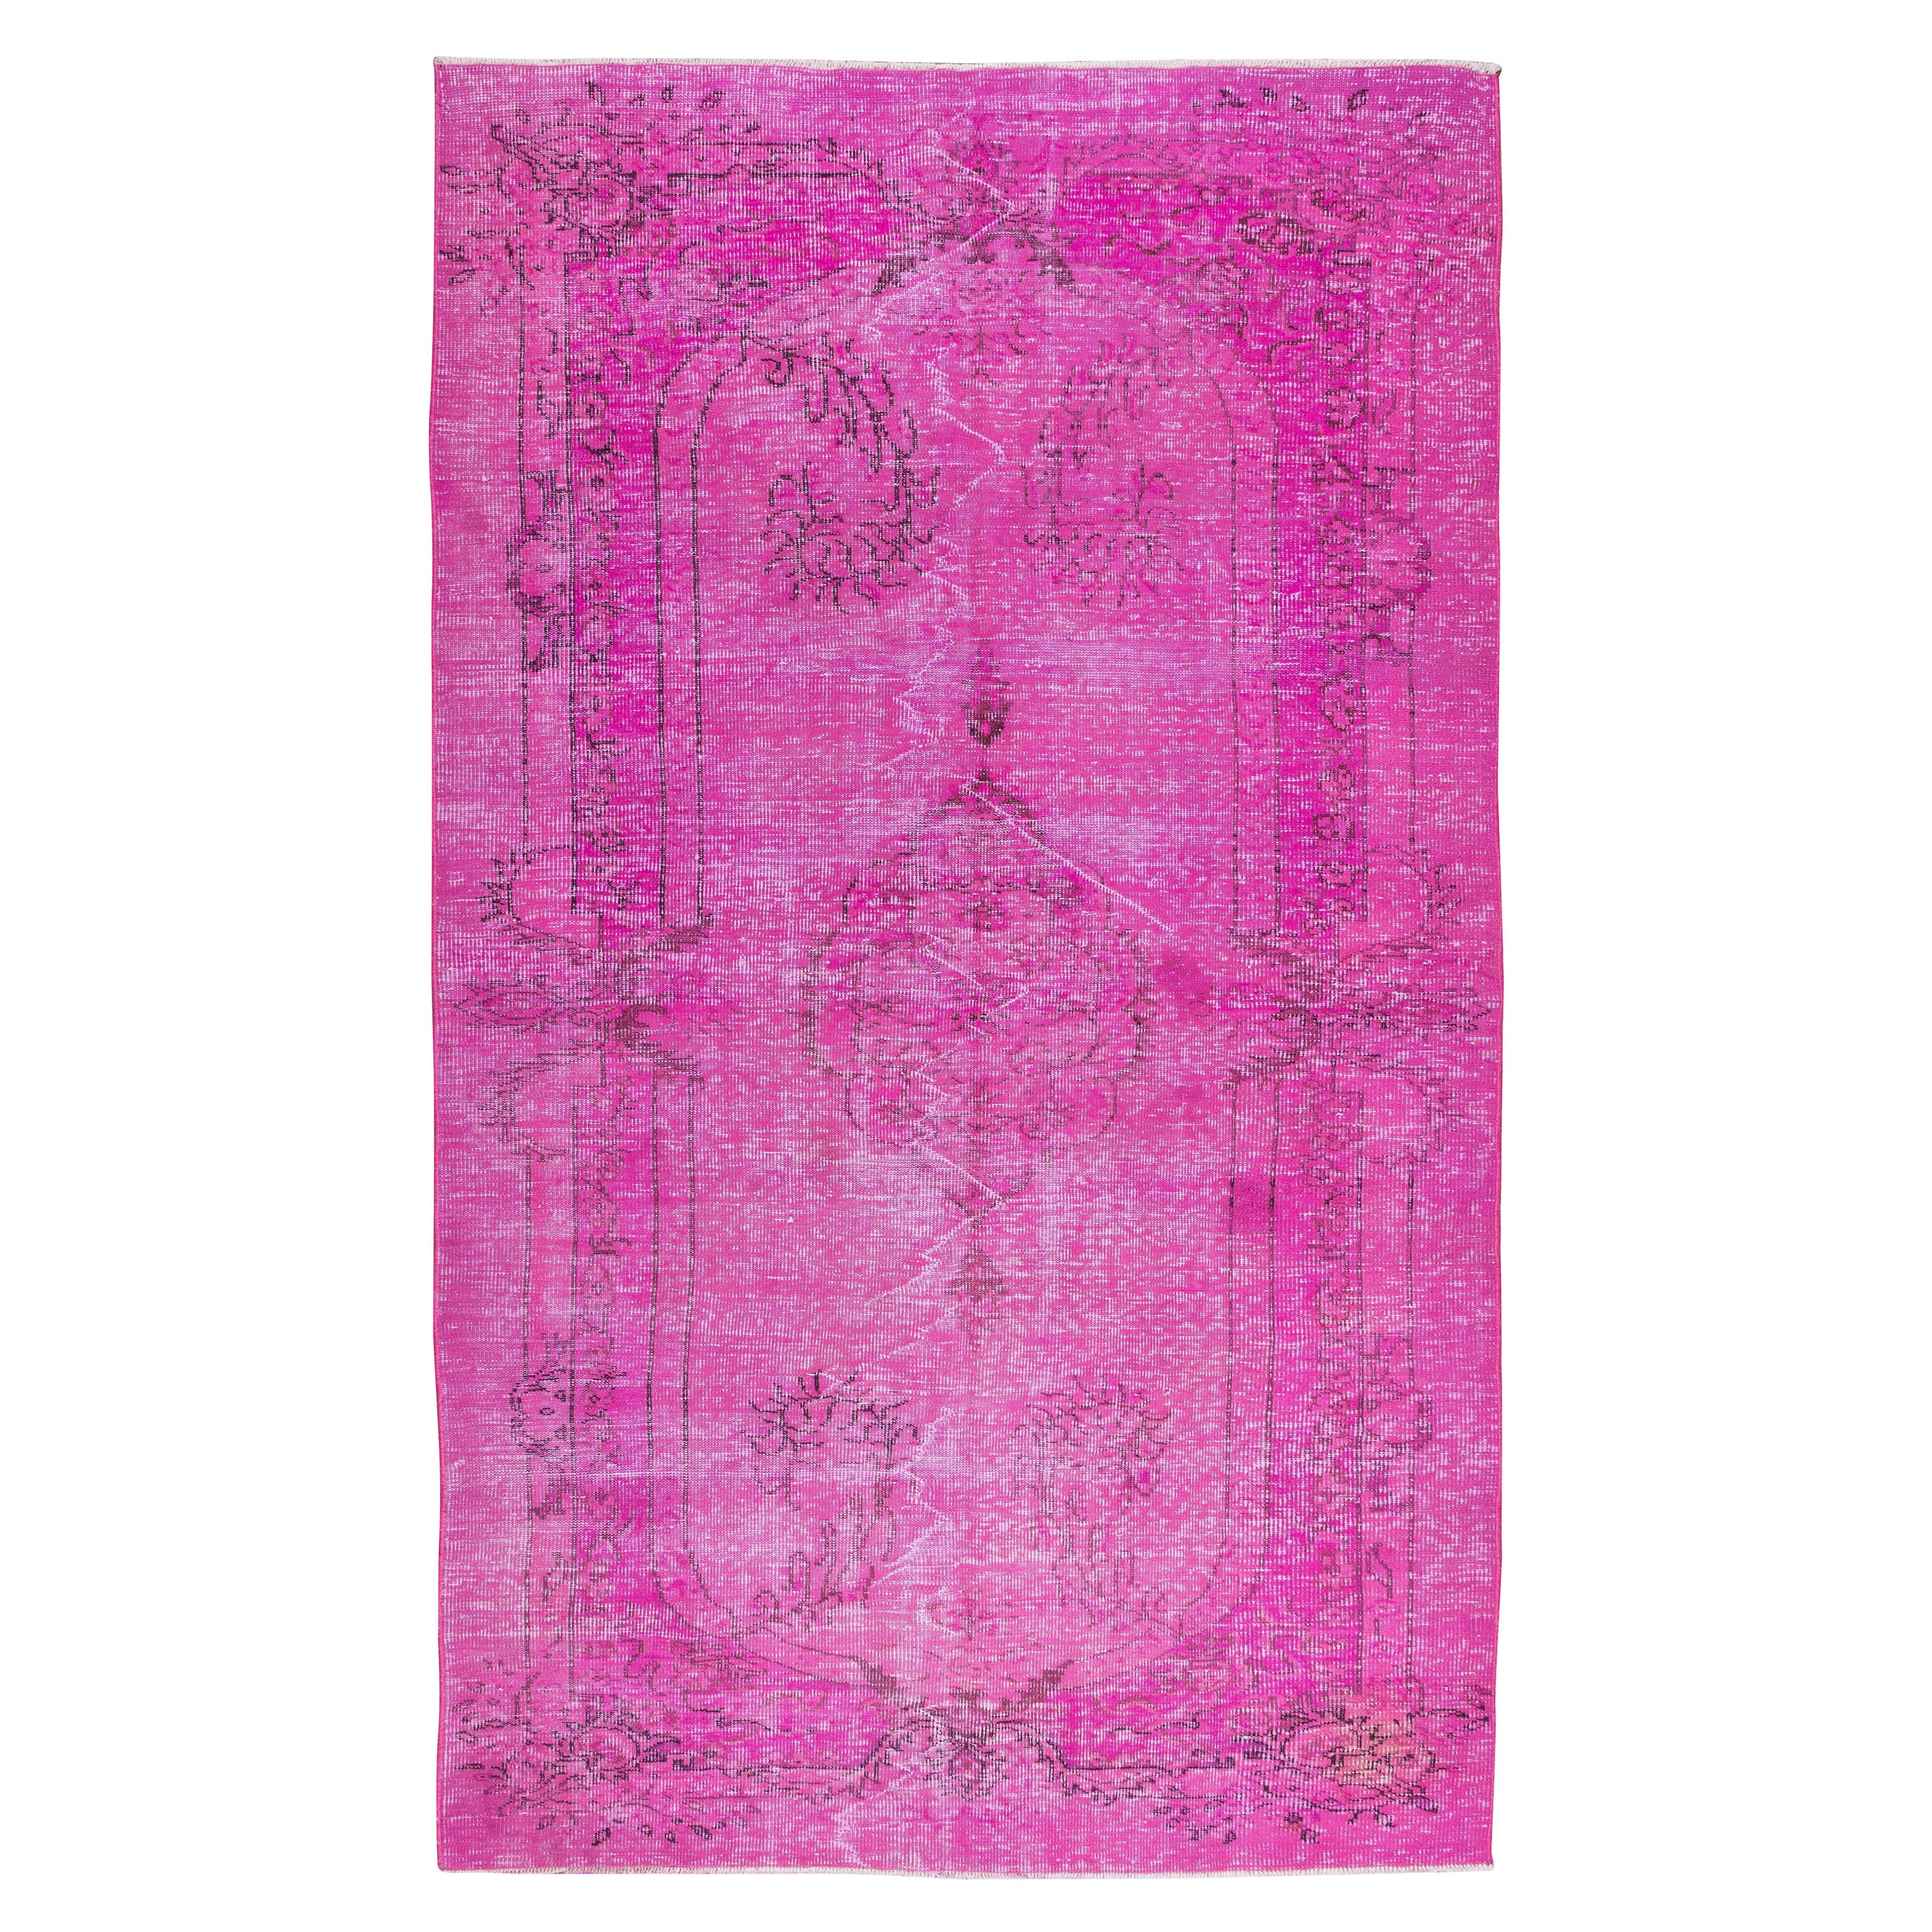 6x7.3 ft Modern Home Decor Pink Carpet, Hand Knotted Anatolian Vintage Area Rug